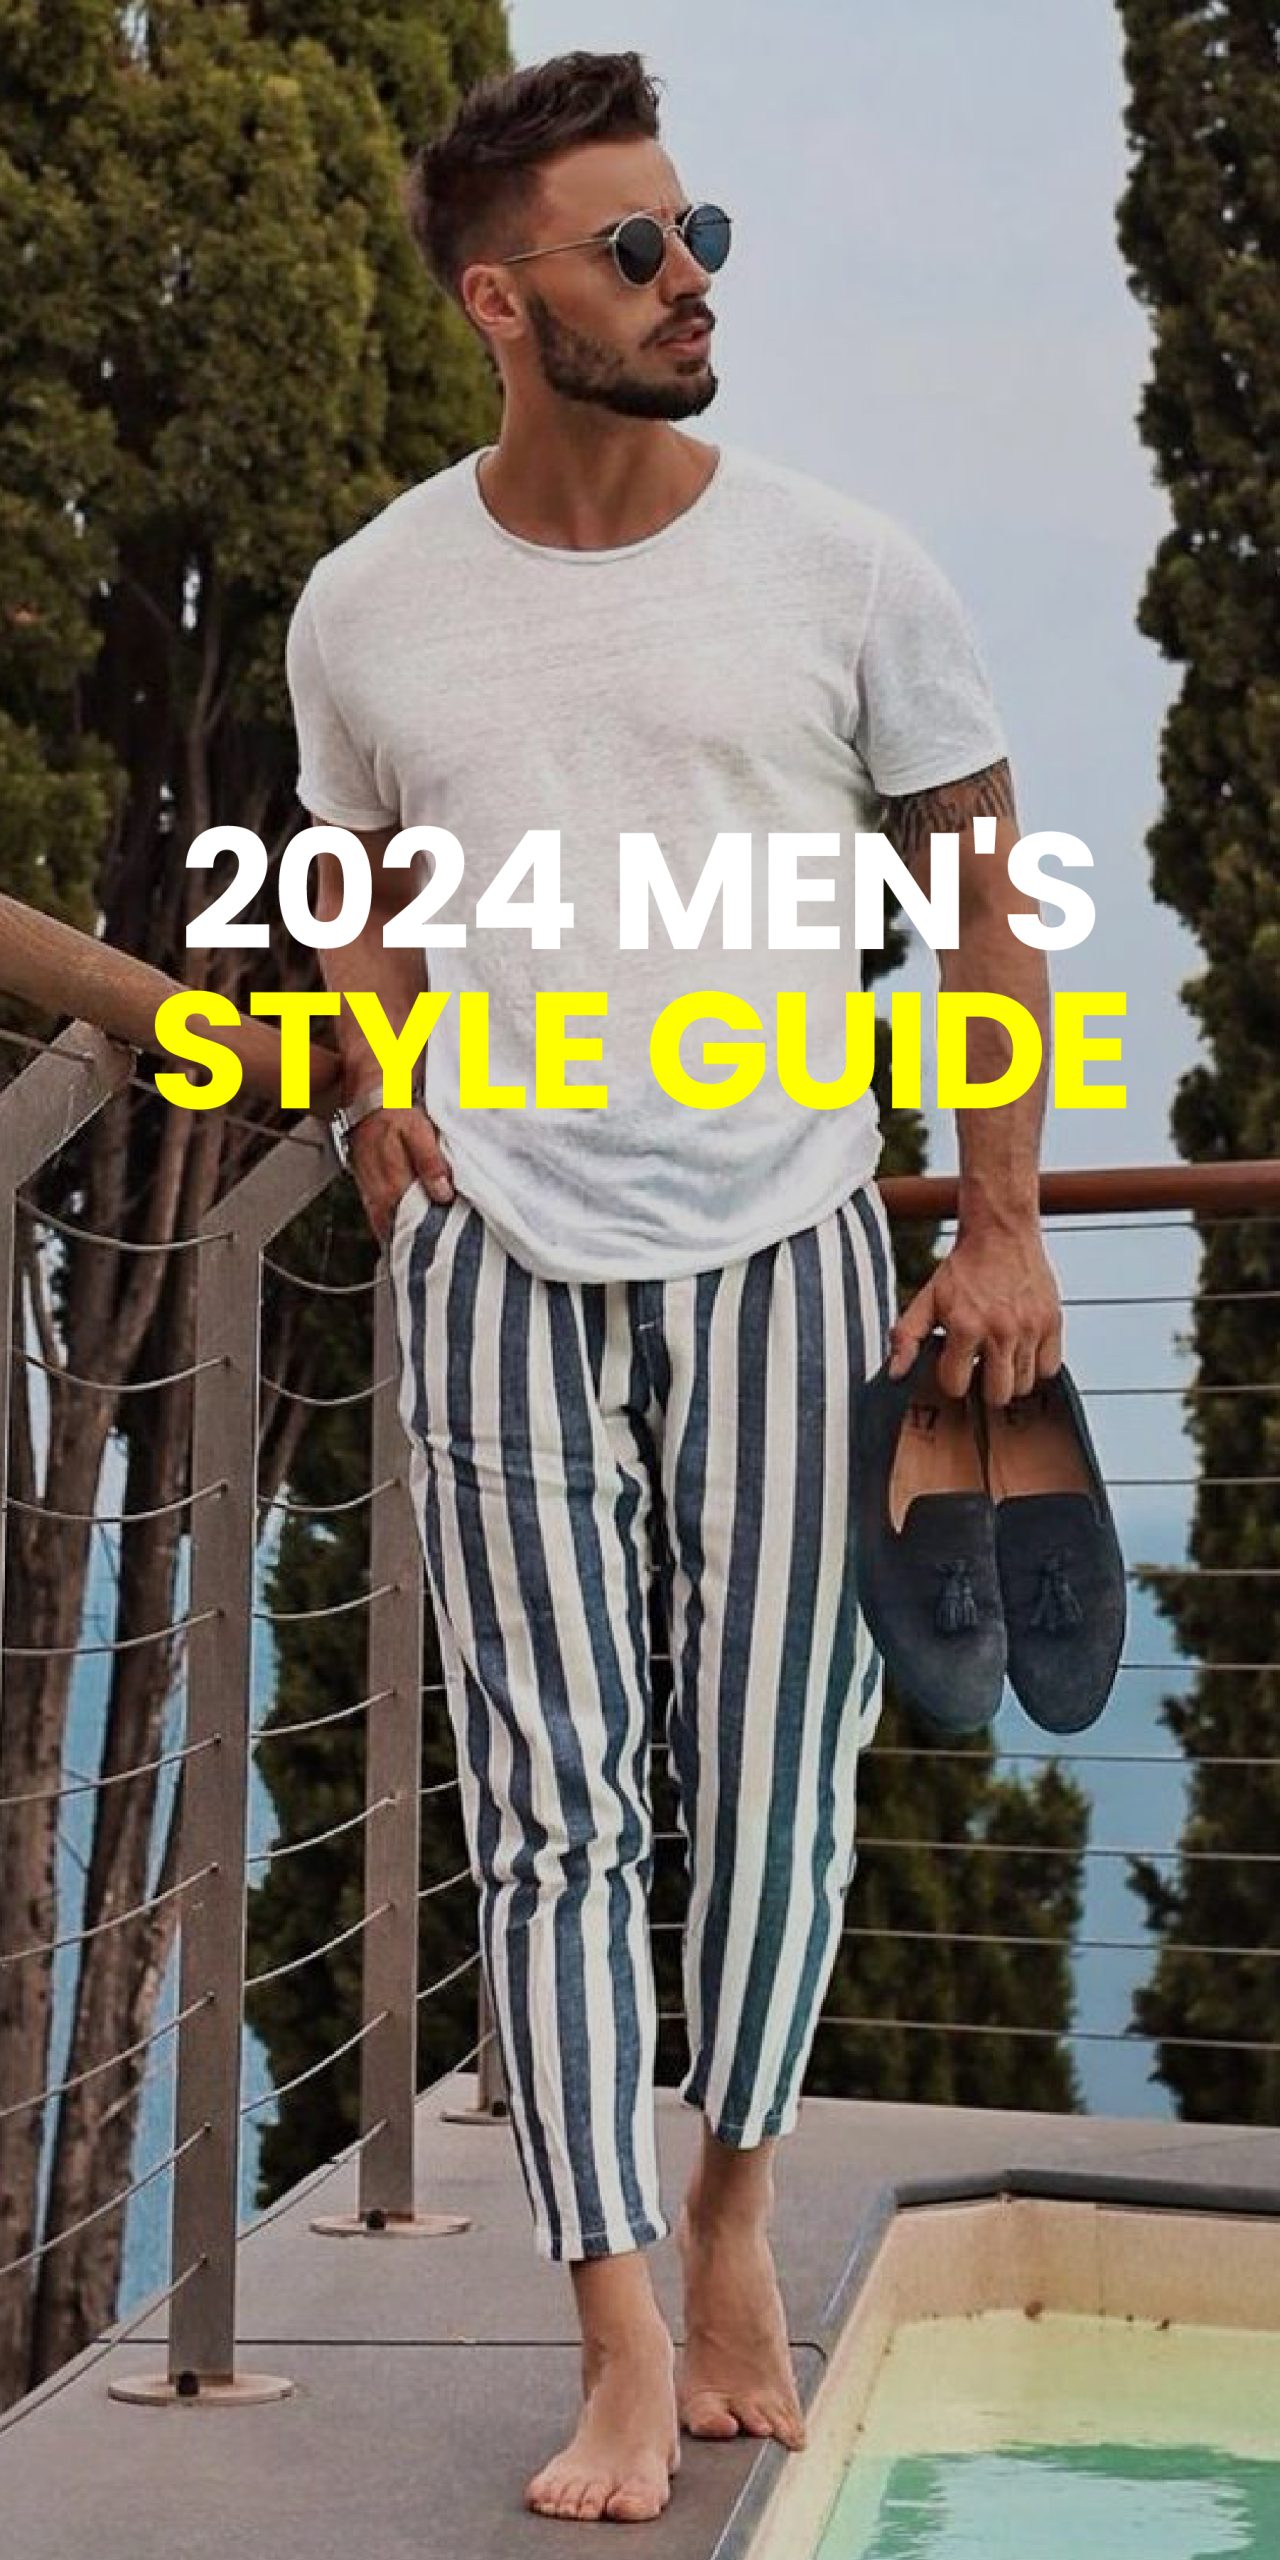 2024 MEN’S STYLE GUIDE